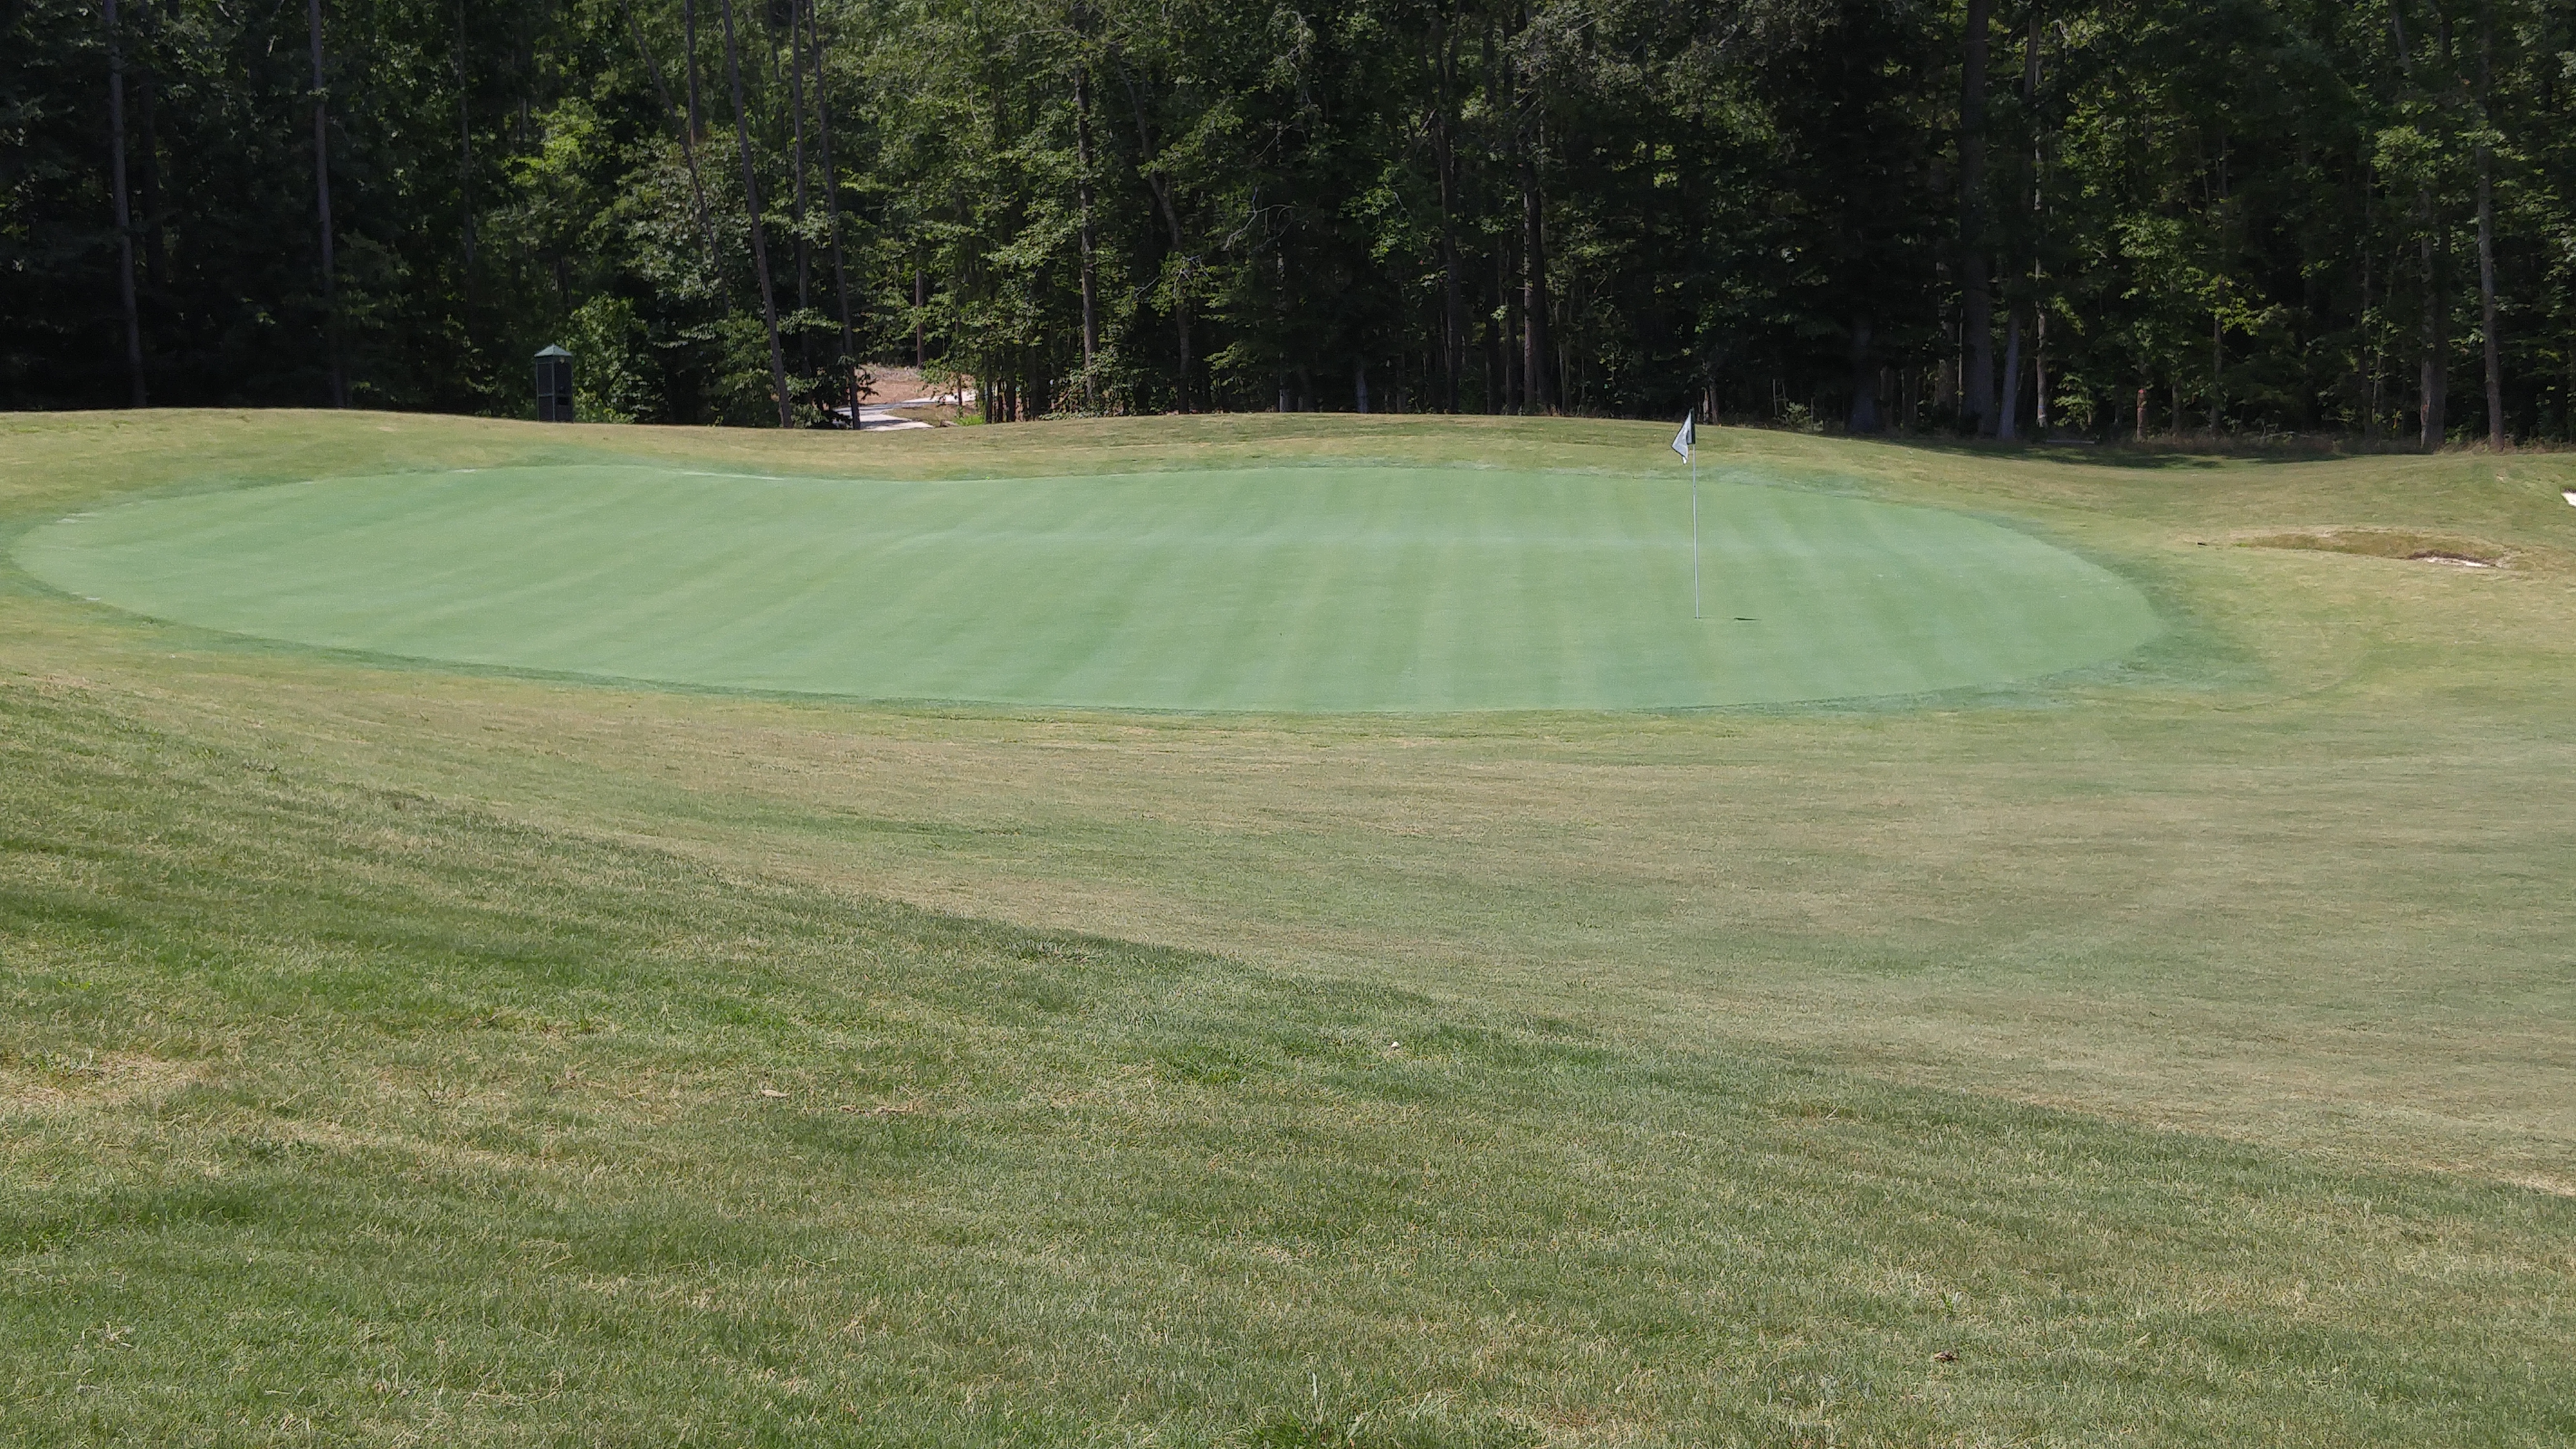 The par-3 3rd at Magnolia Green, with the hidden slope to guide shots to the hole